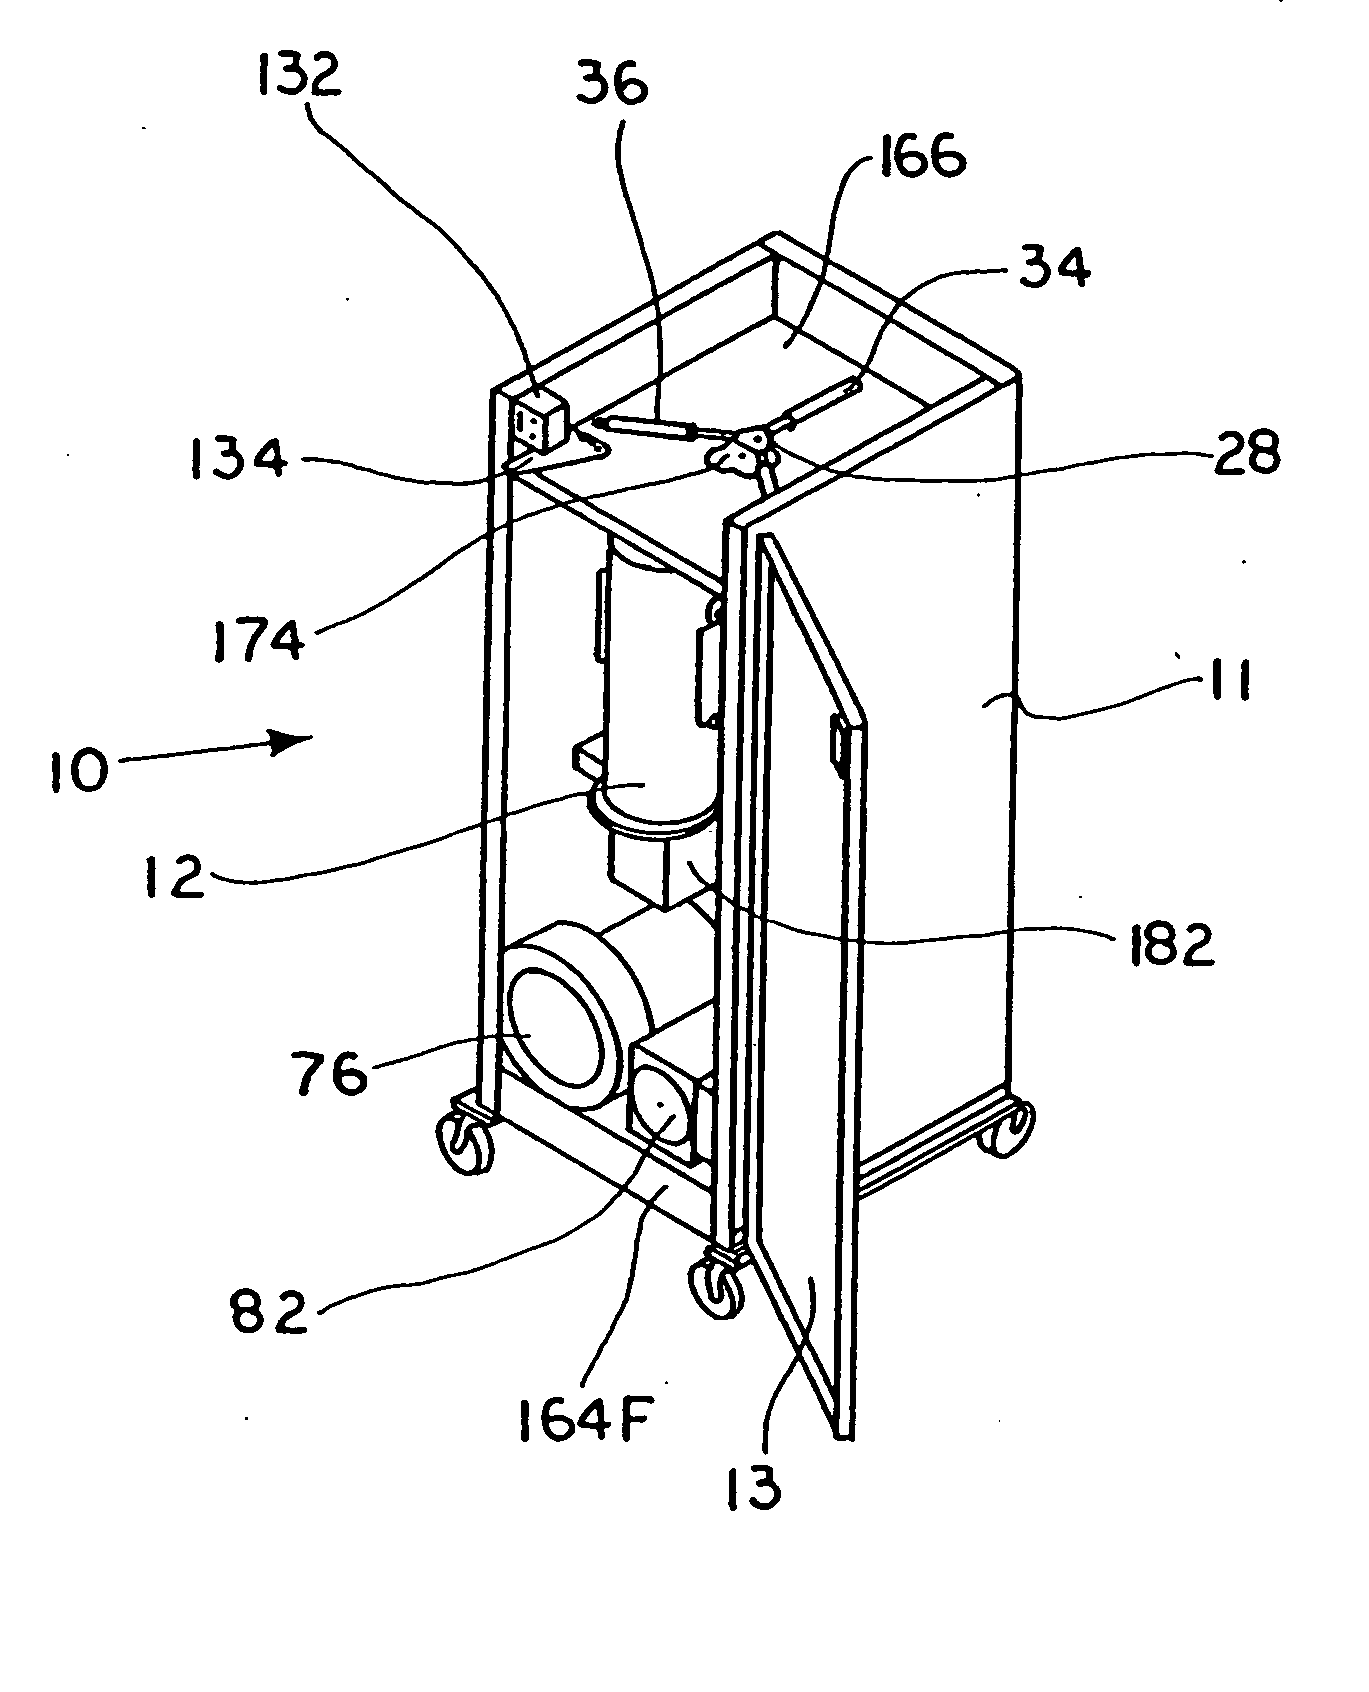 Resin drying method and apparatus